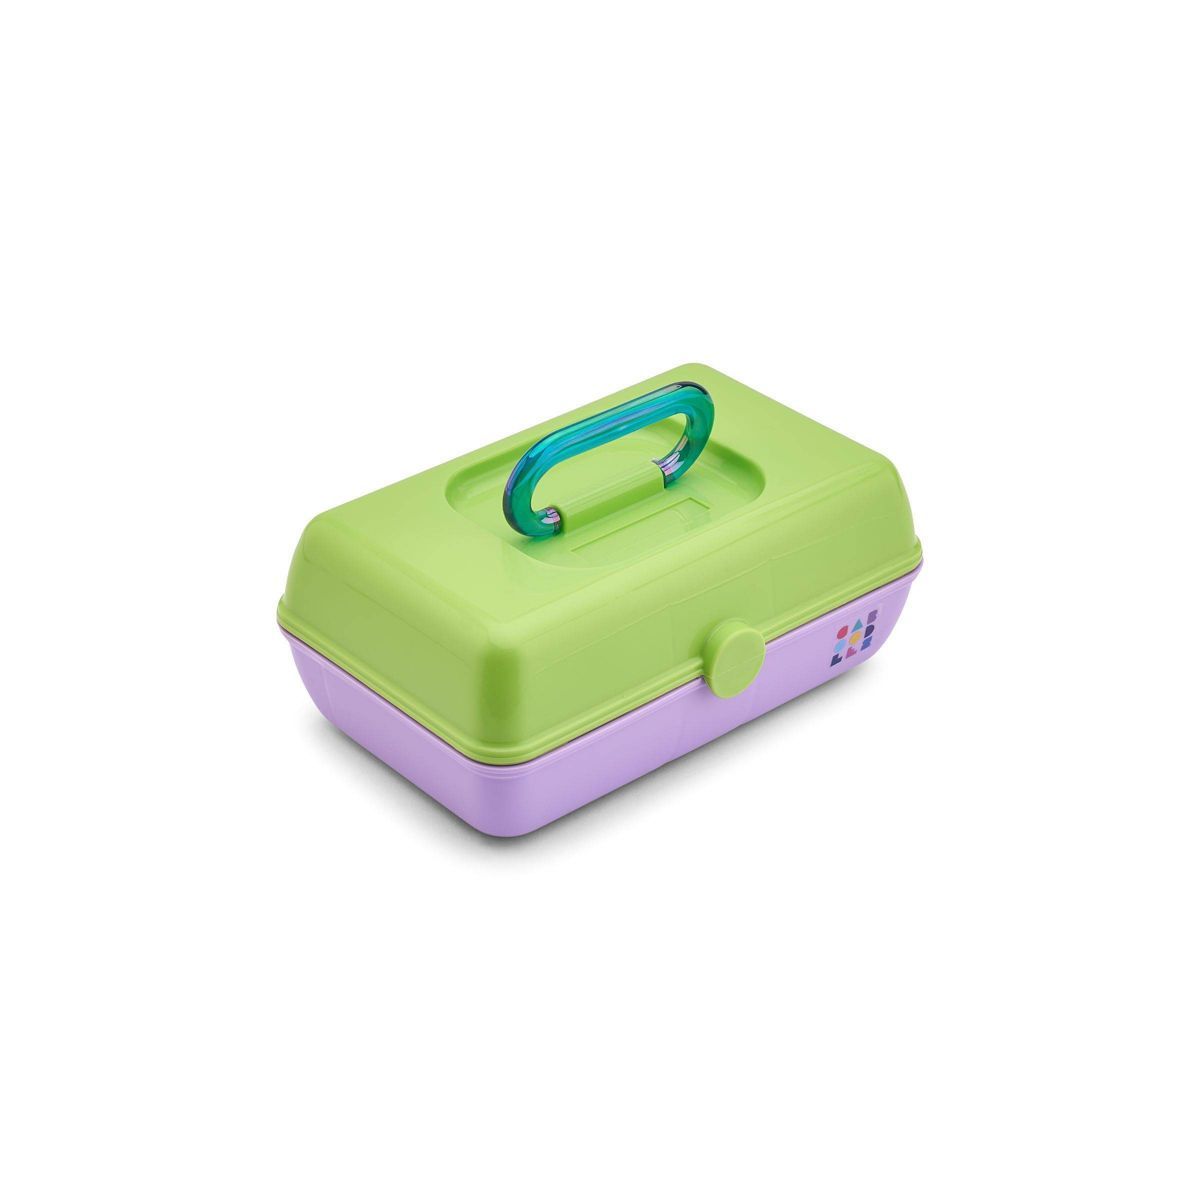 Caboodles Makeup Organizer - Neon Green Over Lilac | Target